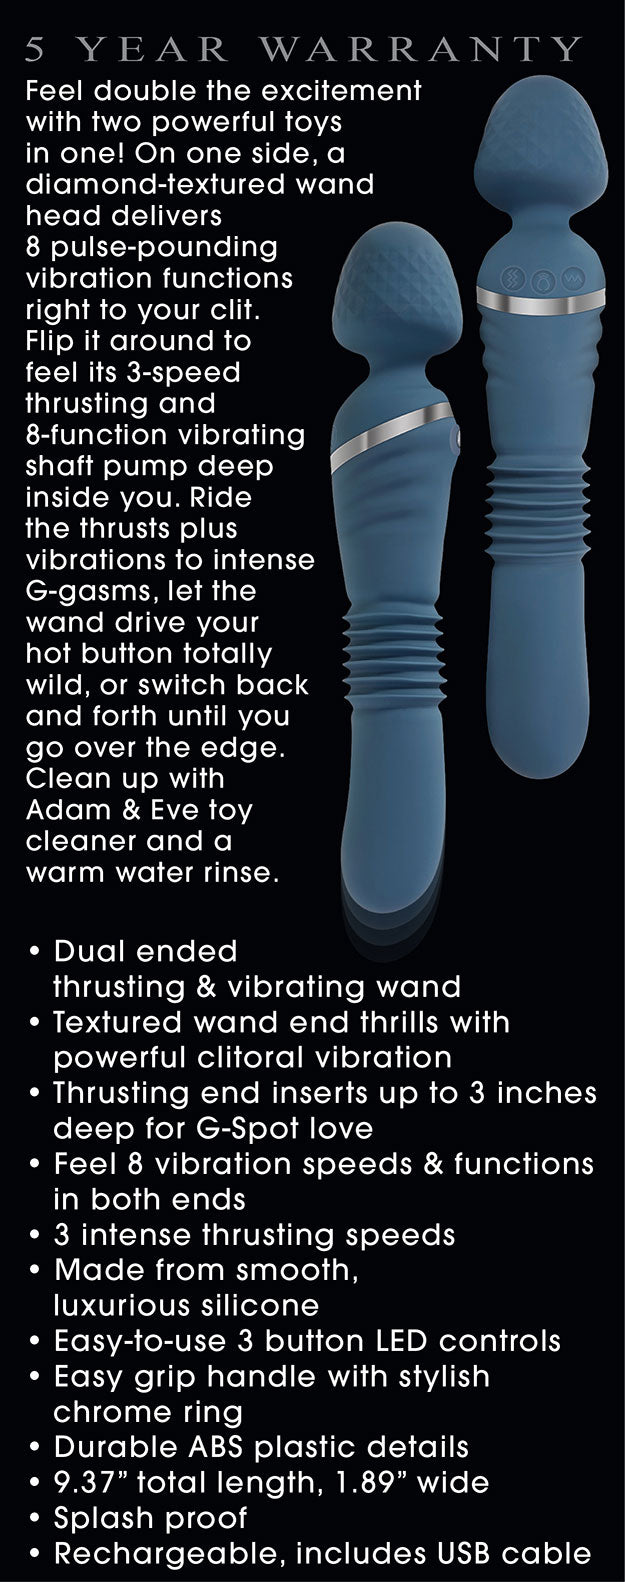 The Dual End Thrusting Wand